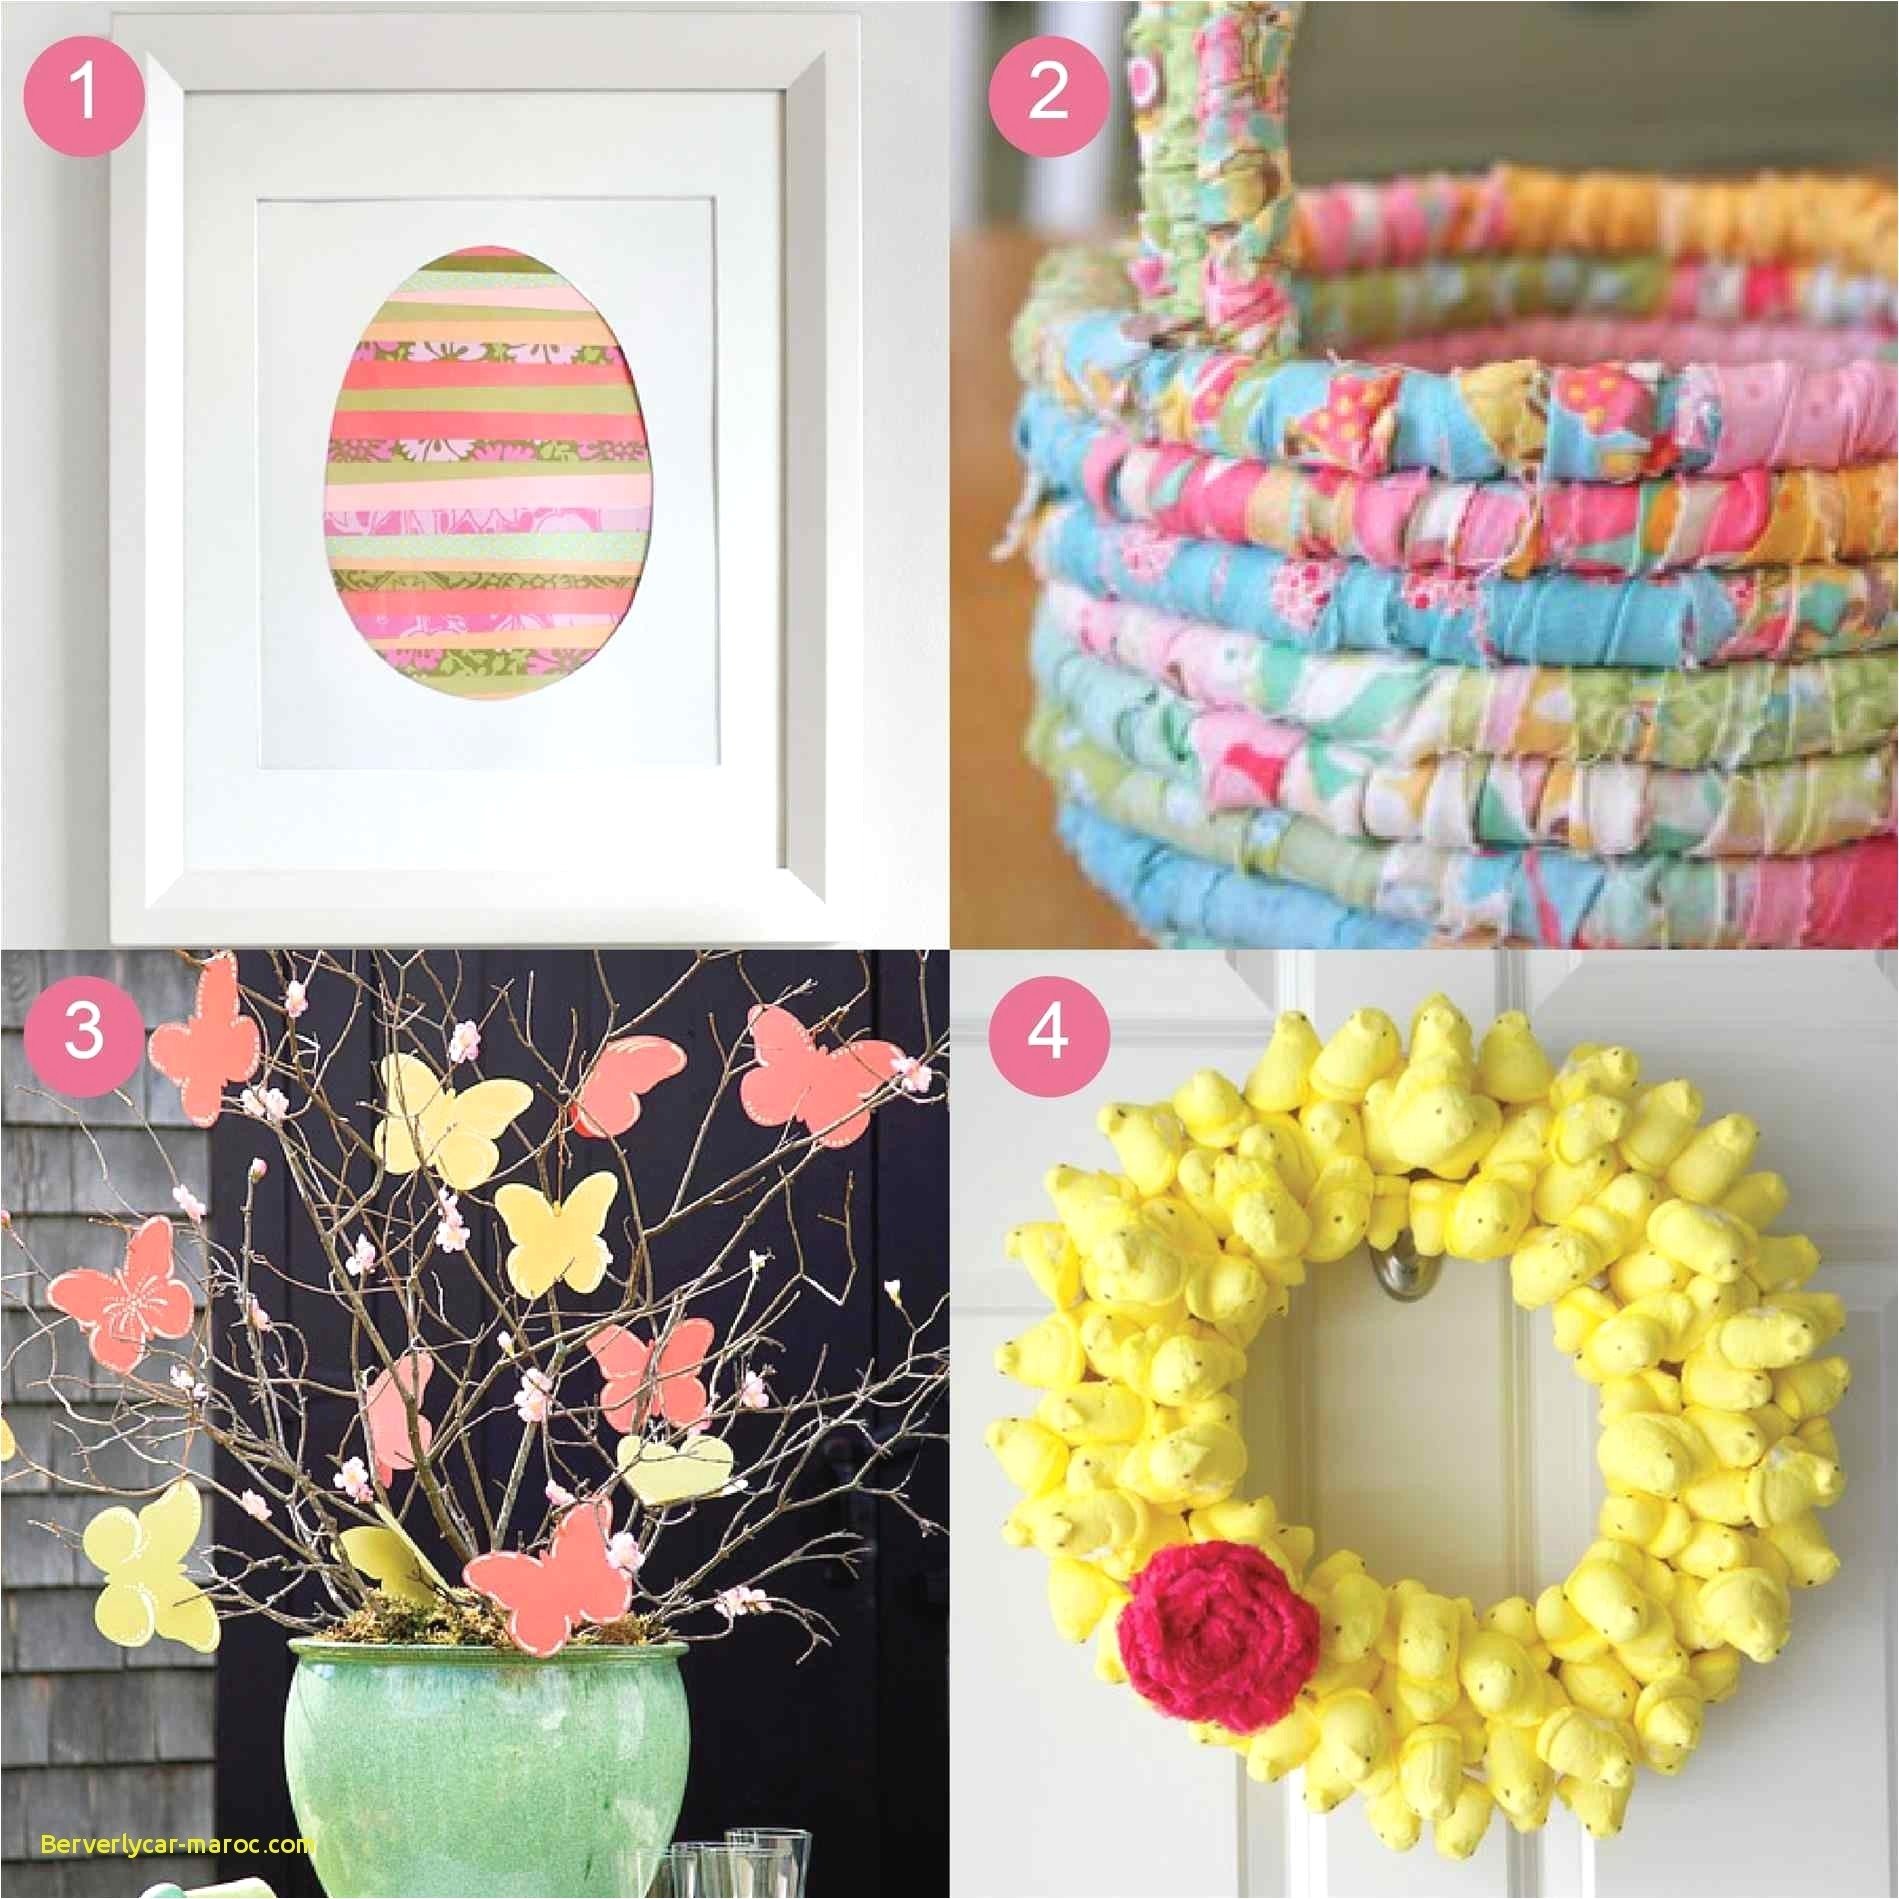 10-attractive-spring-craft-ideas-for-adults-2023